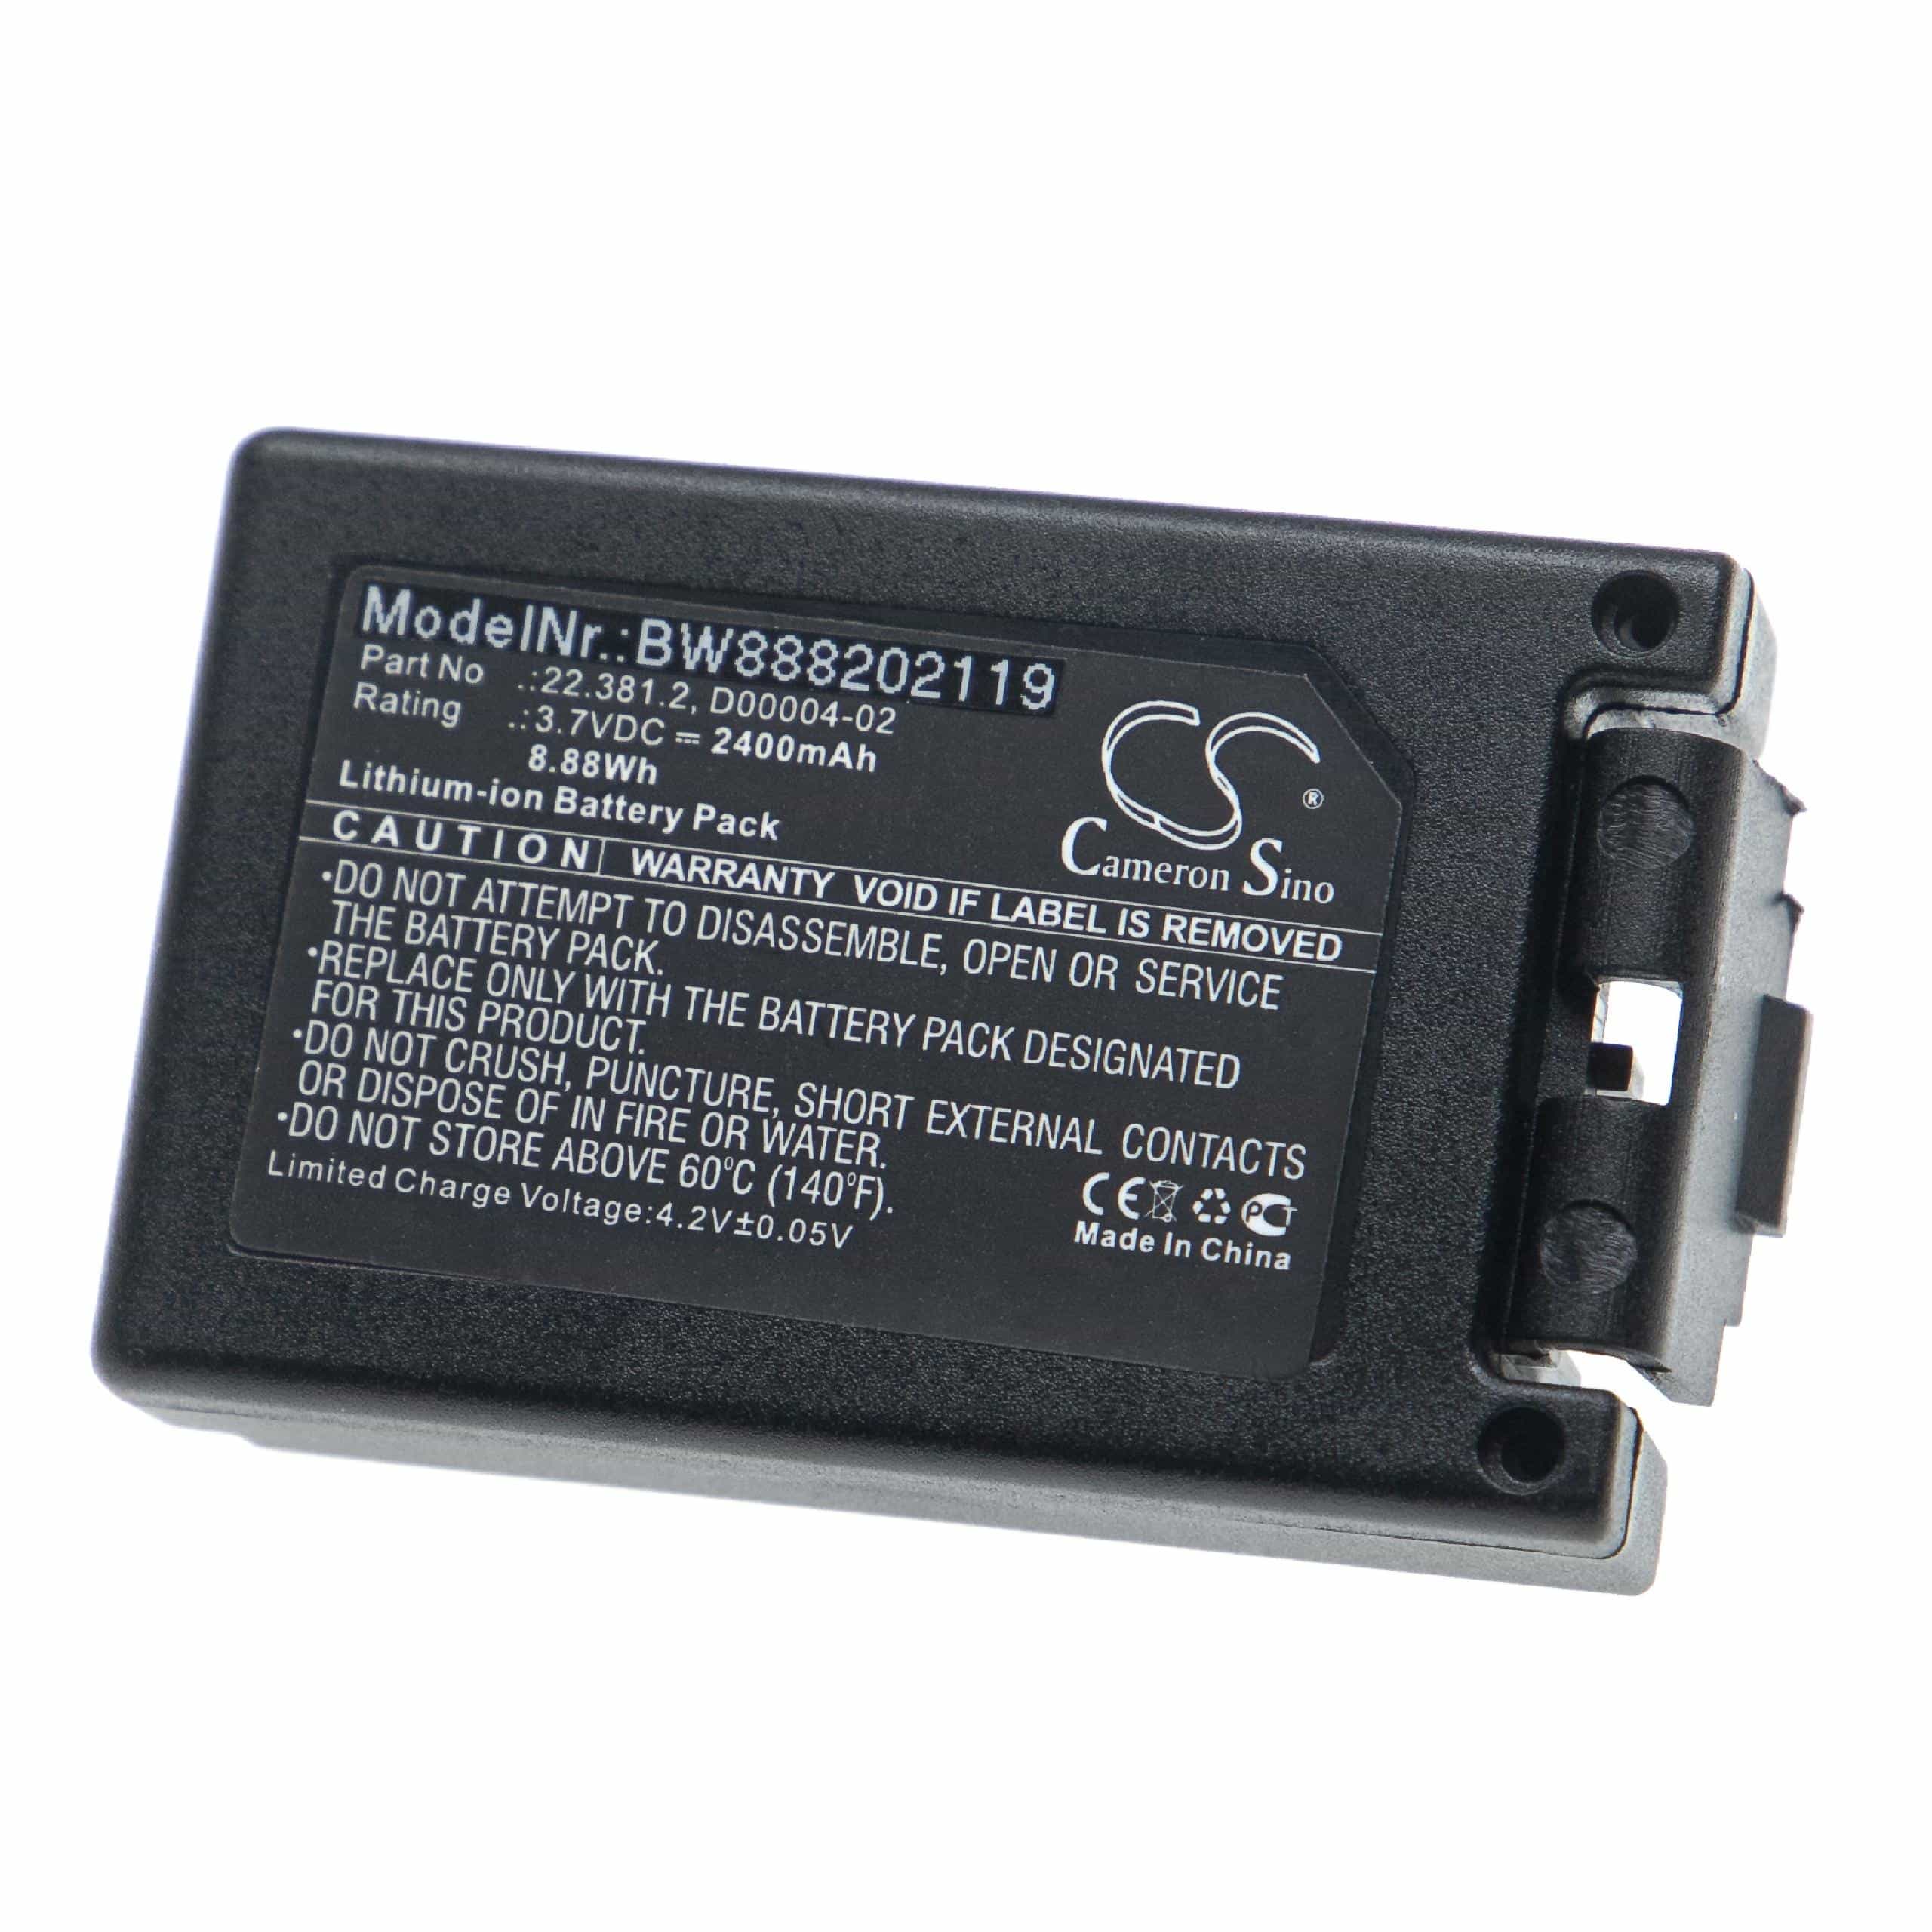 Industrial Remote Control Battery Replacement for Teleradio M245060, 22.381.2, D00004-02 - 2400mAh 3.7V Li-Ion